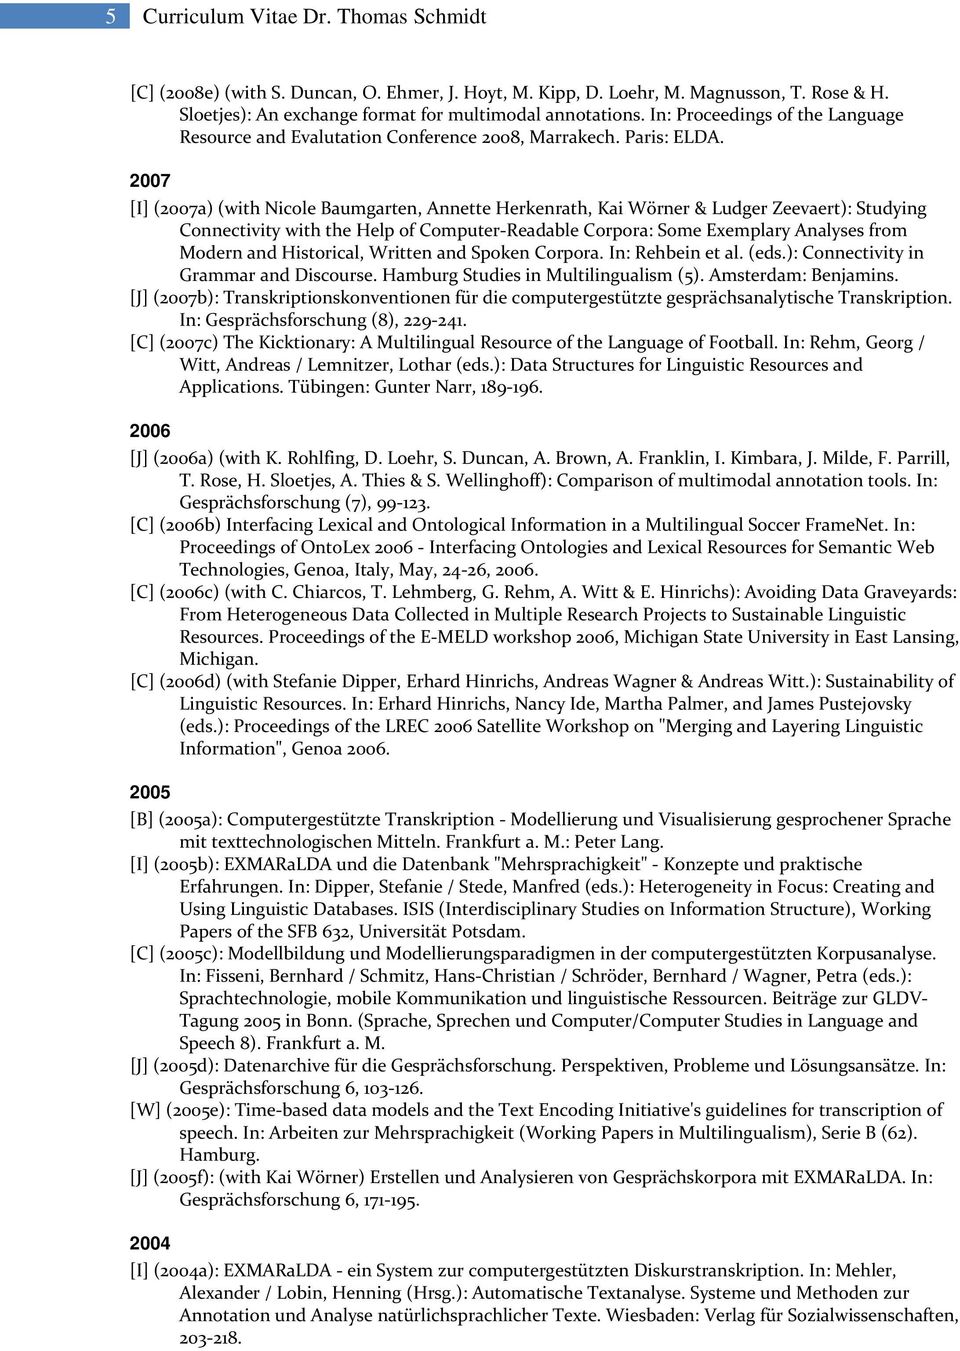 2007 [I] (2007a) (with Nicole Baumgarten, Annette Herkenrath, Kai Wörner & Ludger Zeevaert): Studying Connectivity with the Help of Computer Readable Corpora: Some Exemplary Analyses from Modern and